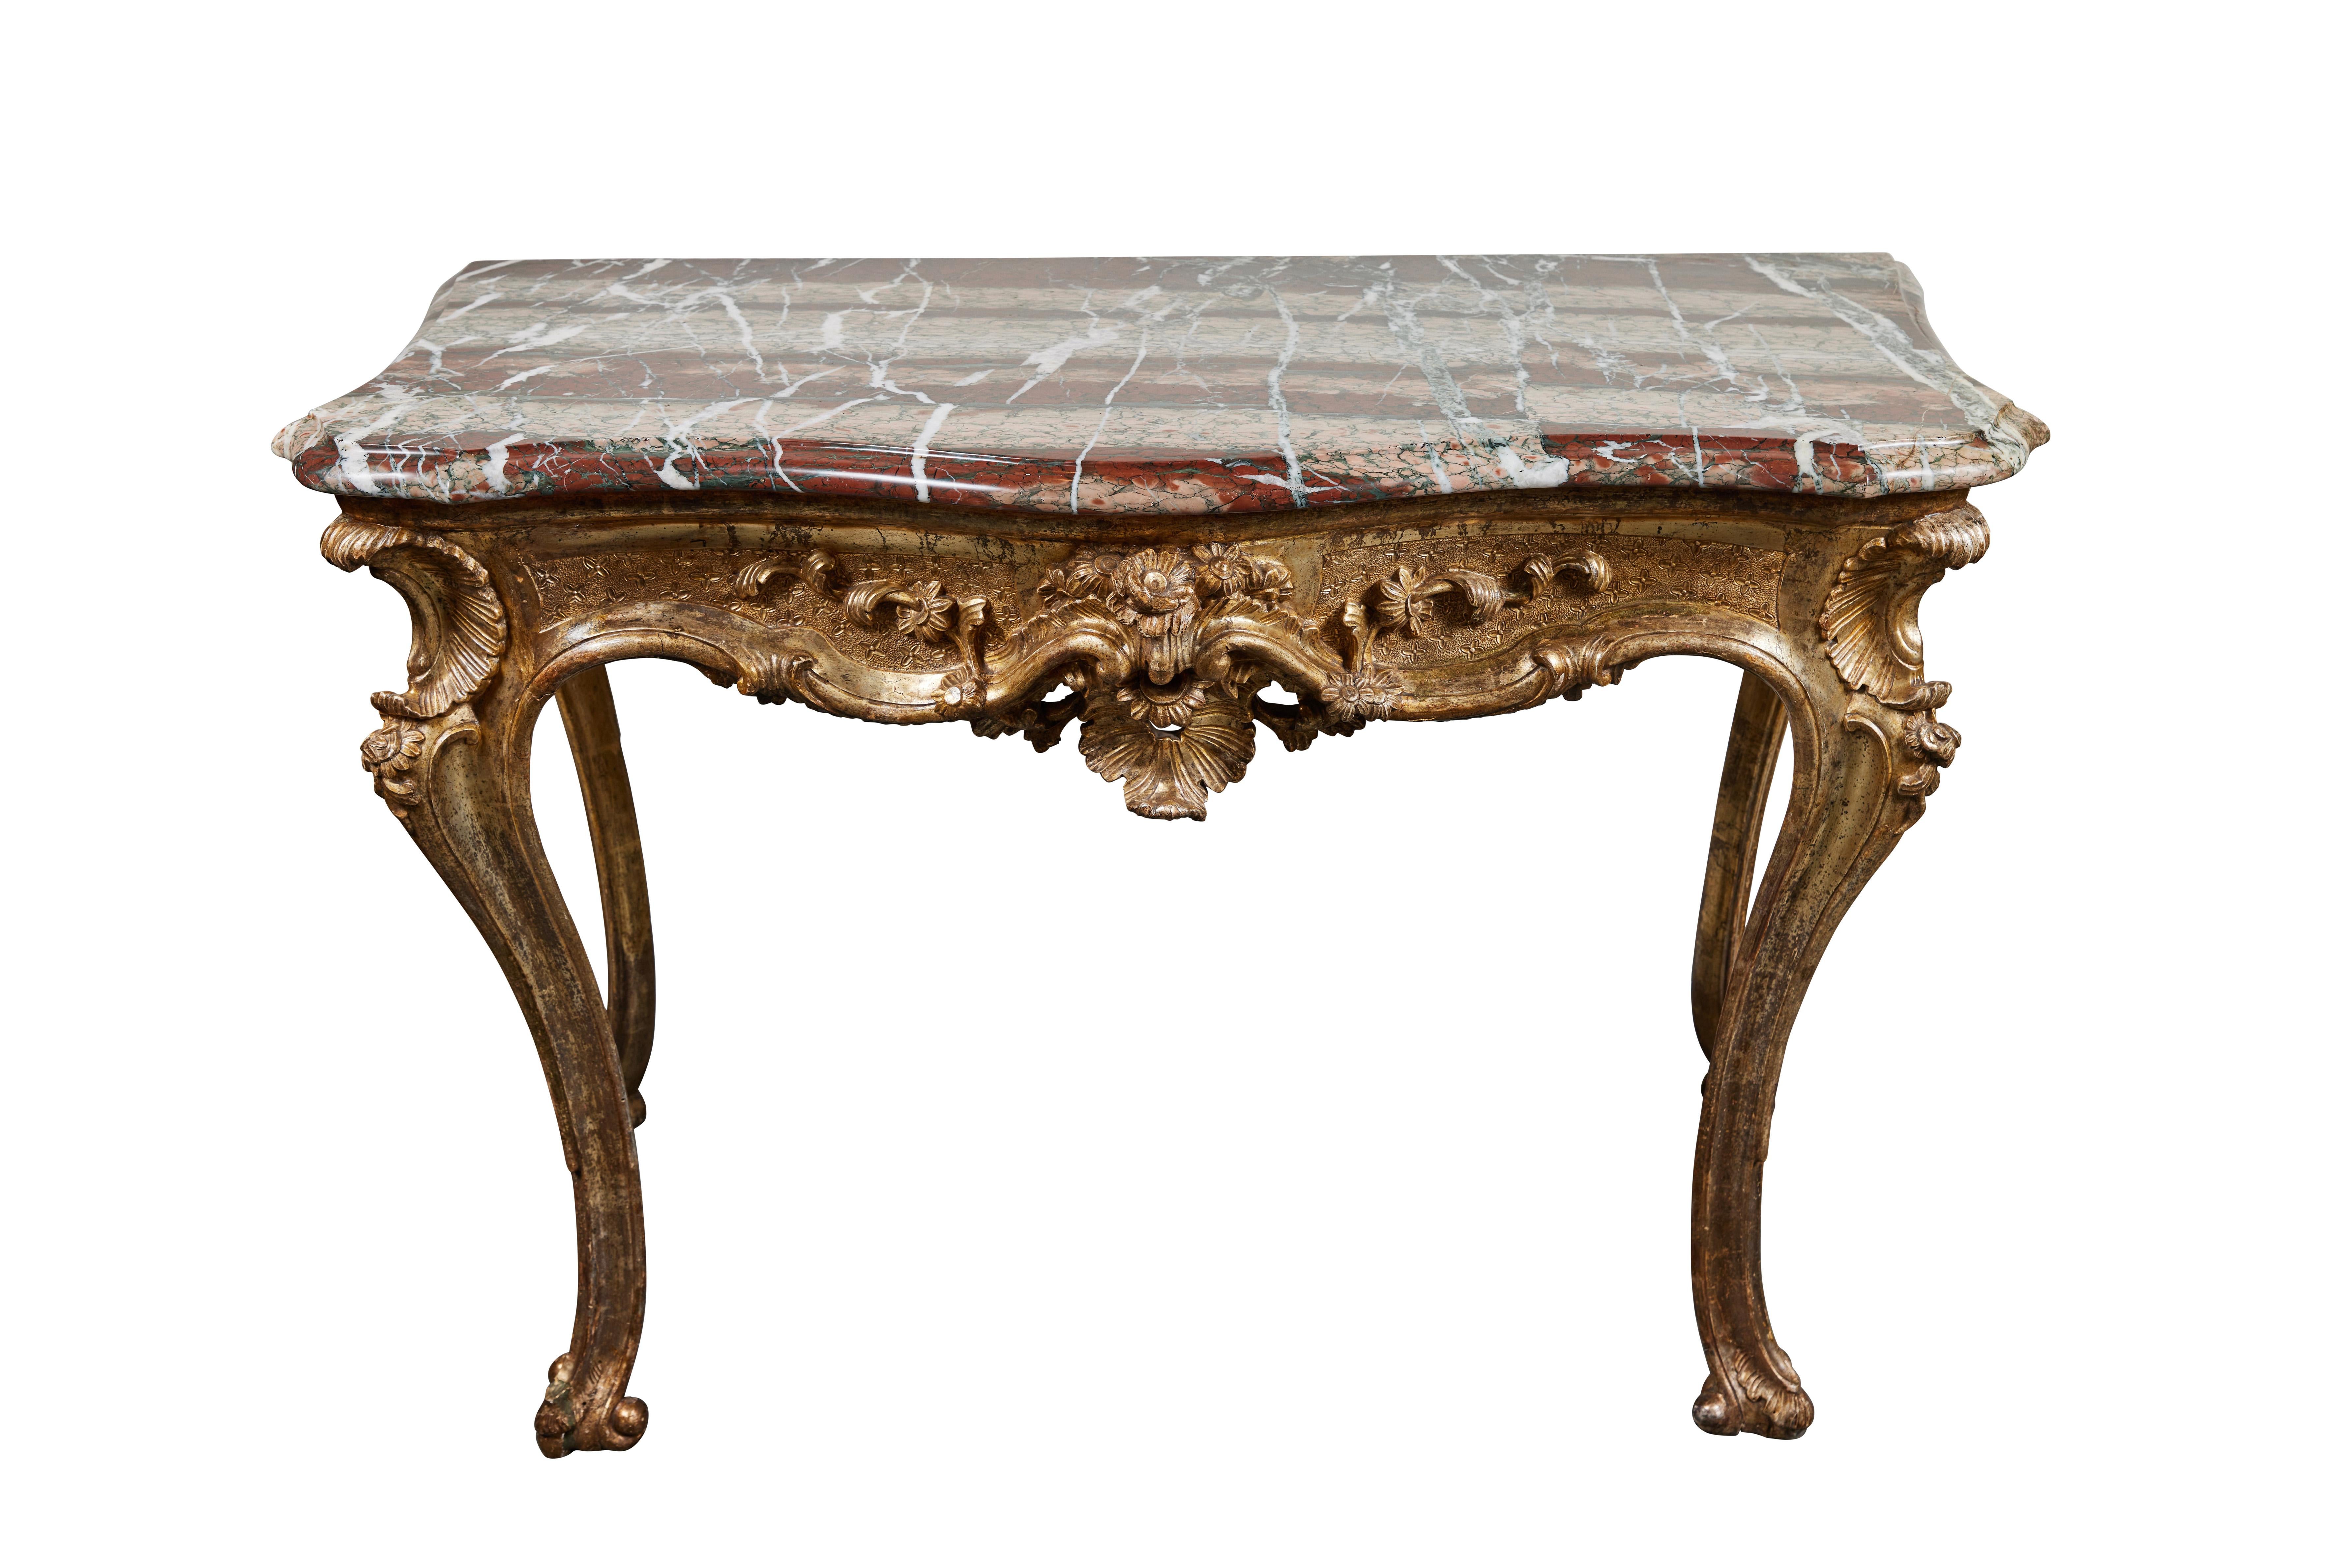 A pair of 18th century, hand-carved and champagne gilded, serpentine consoles surmounted by striking, original, polished marble tops. Each on long, graceful legs terminating in scroll-form feet. Each with four scooped corners, and dramatic aprons